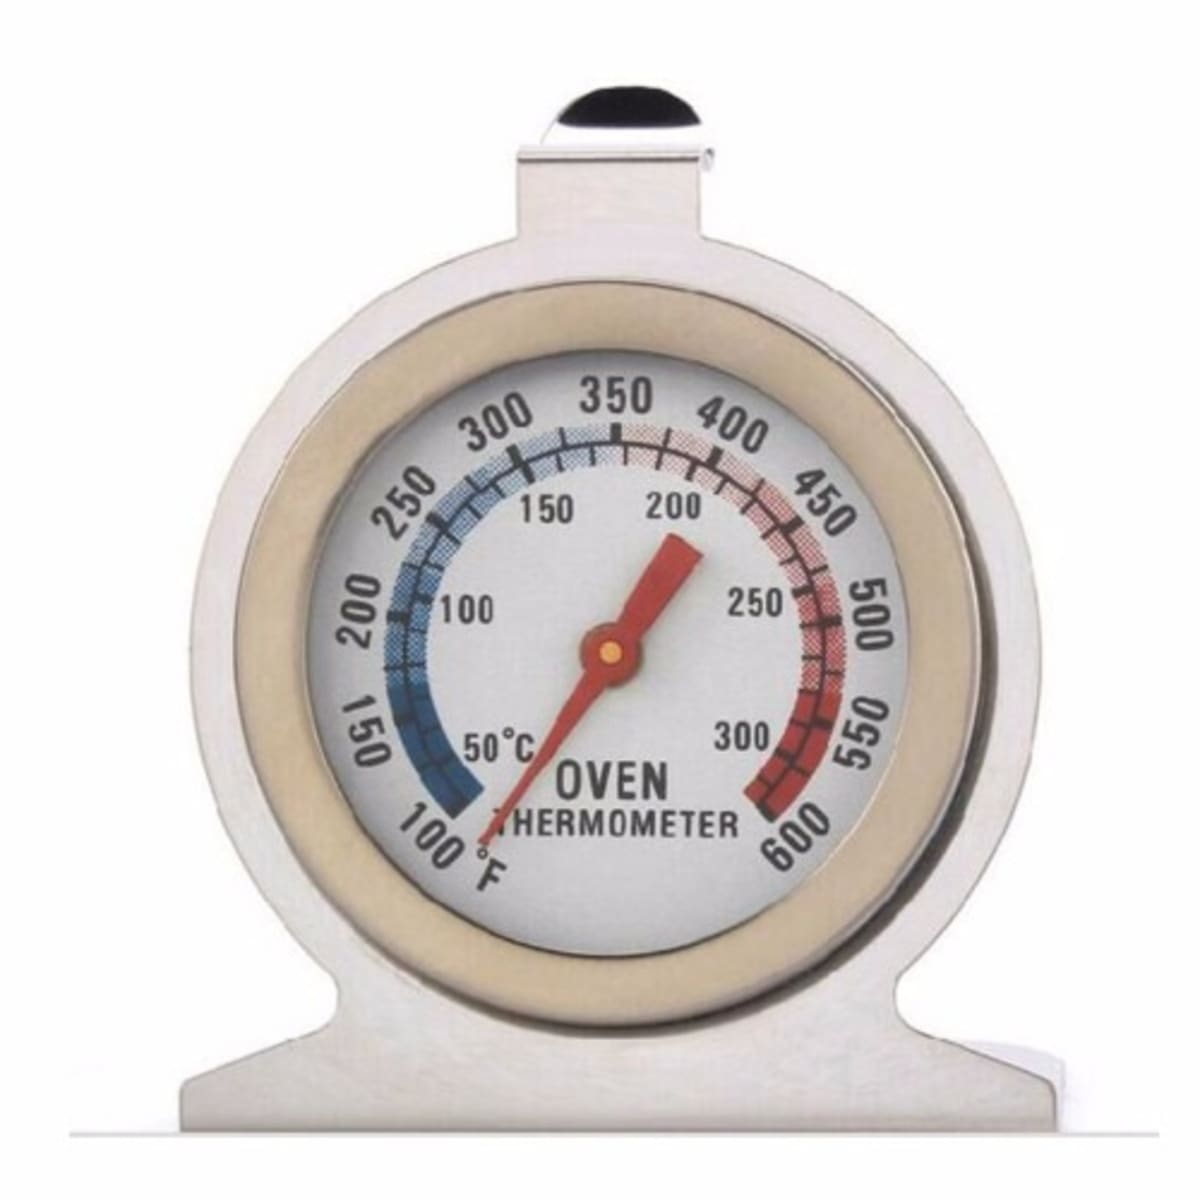 Universal Kitchen Cooking Temperature Stand Up Dial Oven Thermometer Gauge